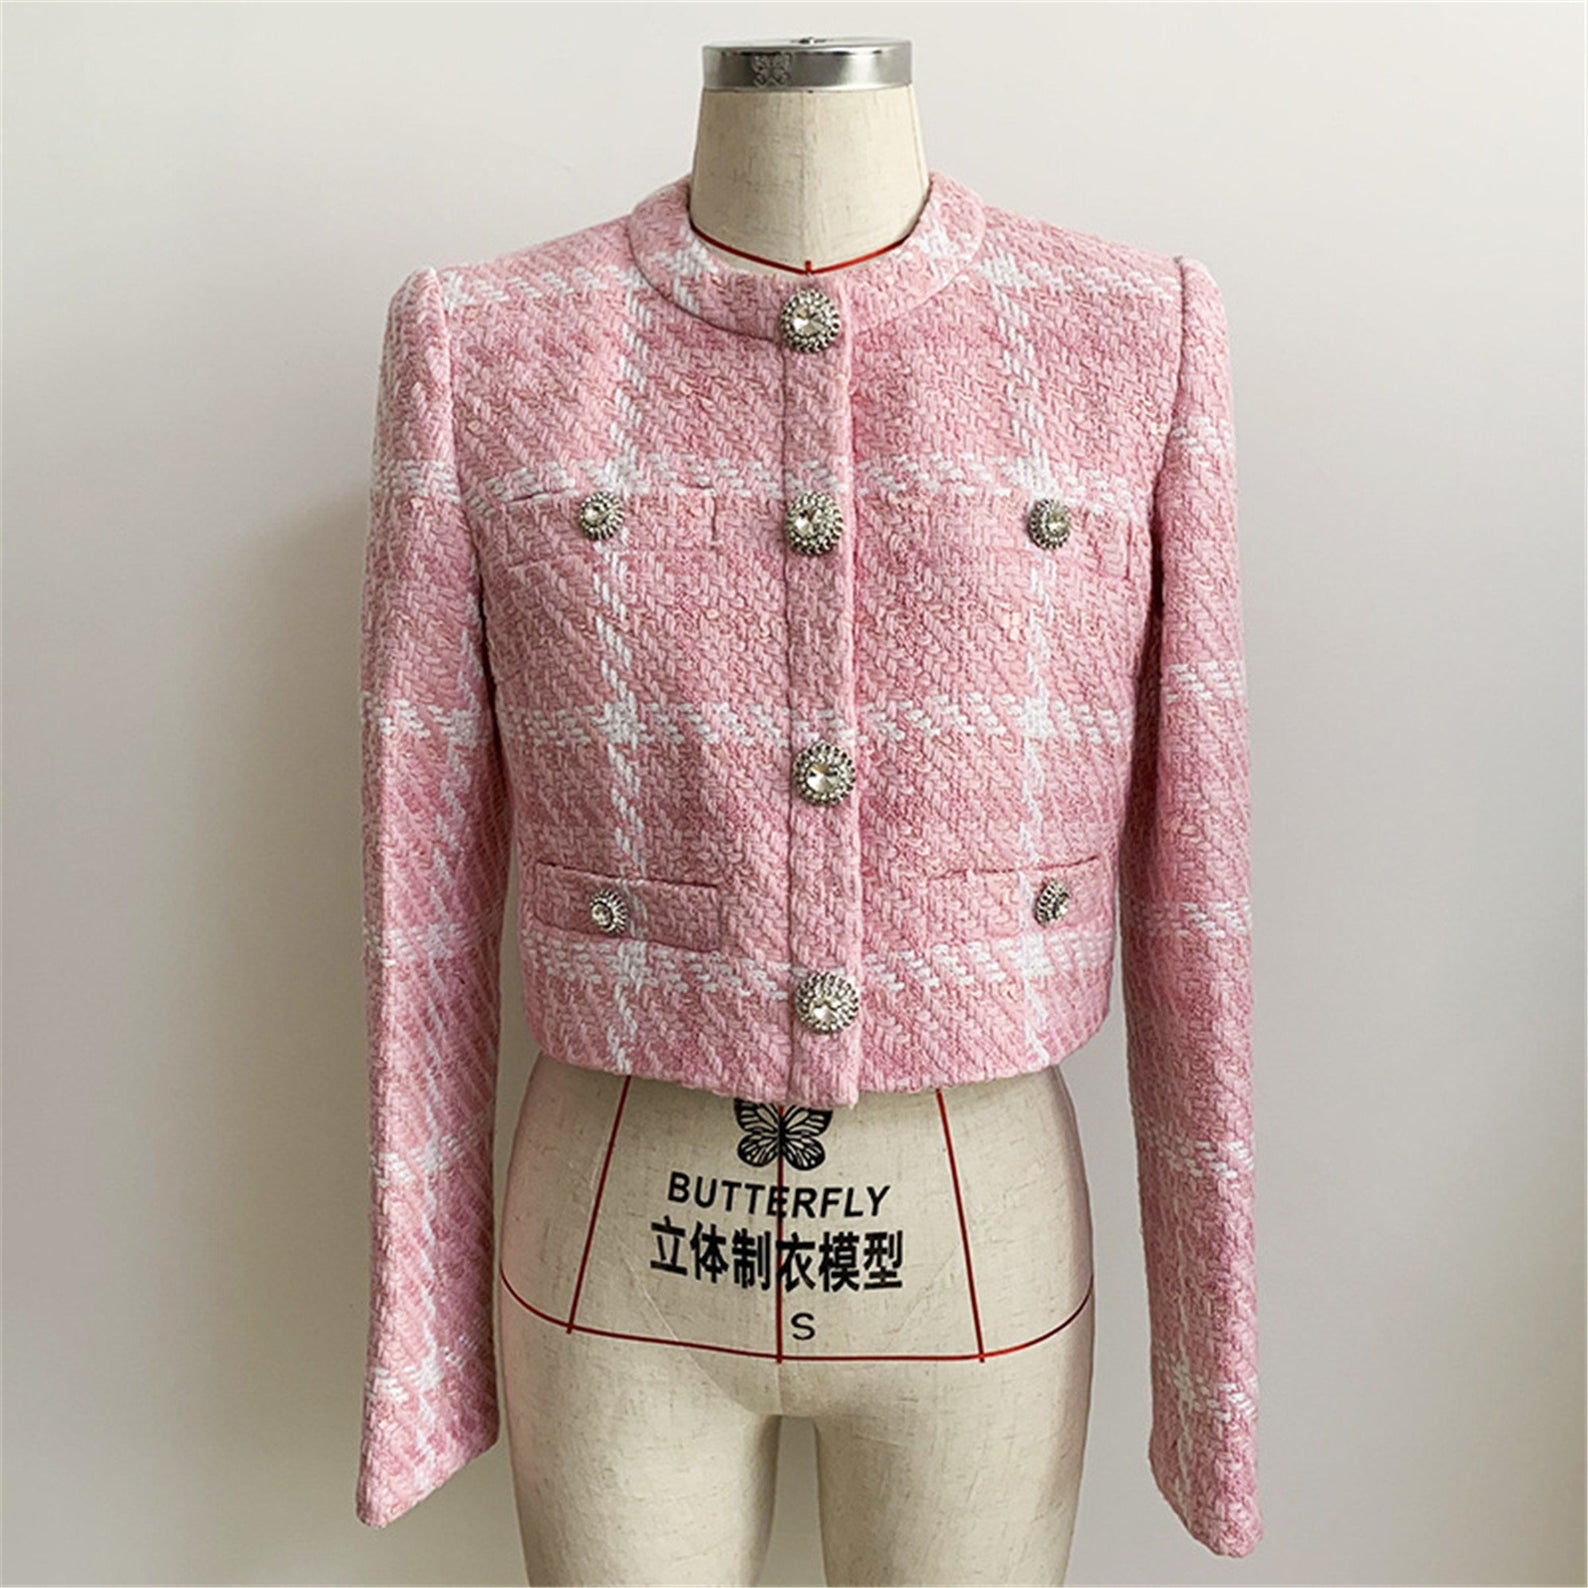 Women's Designer Inspired Jewellery Buttons Tweed Pink Crop Blazer + Skirt  UK CUSTOMER SERVICE!  Women's Jewellery Buttons Tweed Pink Crop Blazer + Skirt, can worn for casual wear, party, lunch with friends. Feel more comfort and good. Size: UK 4-12/ EU 32-40/ US 0-8